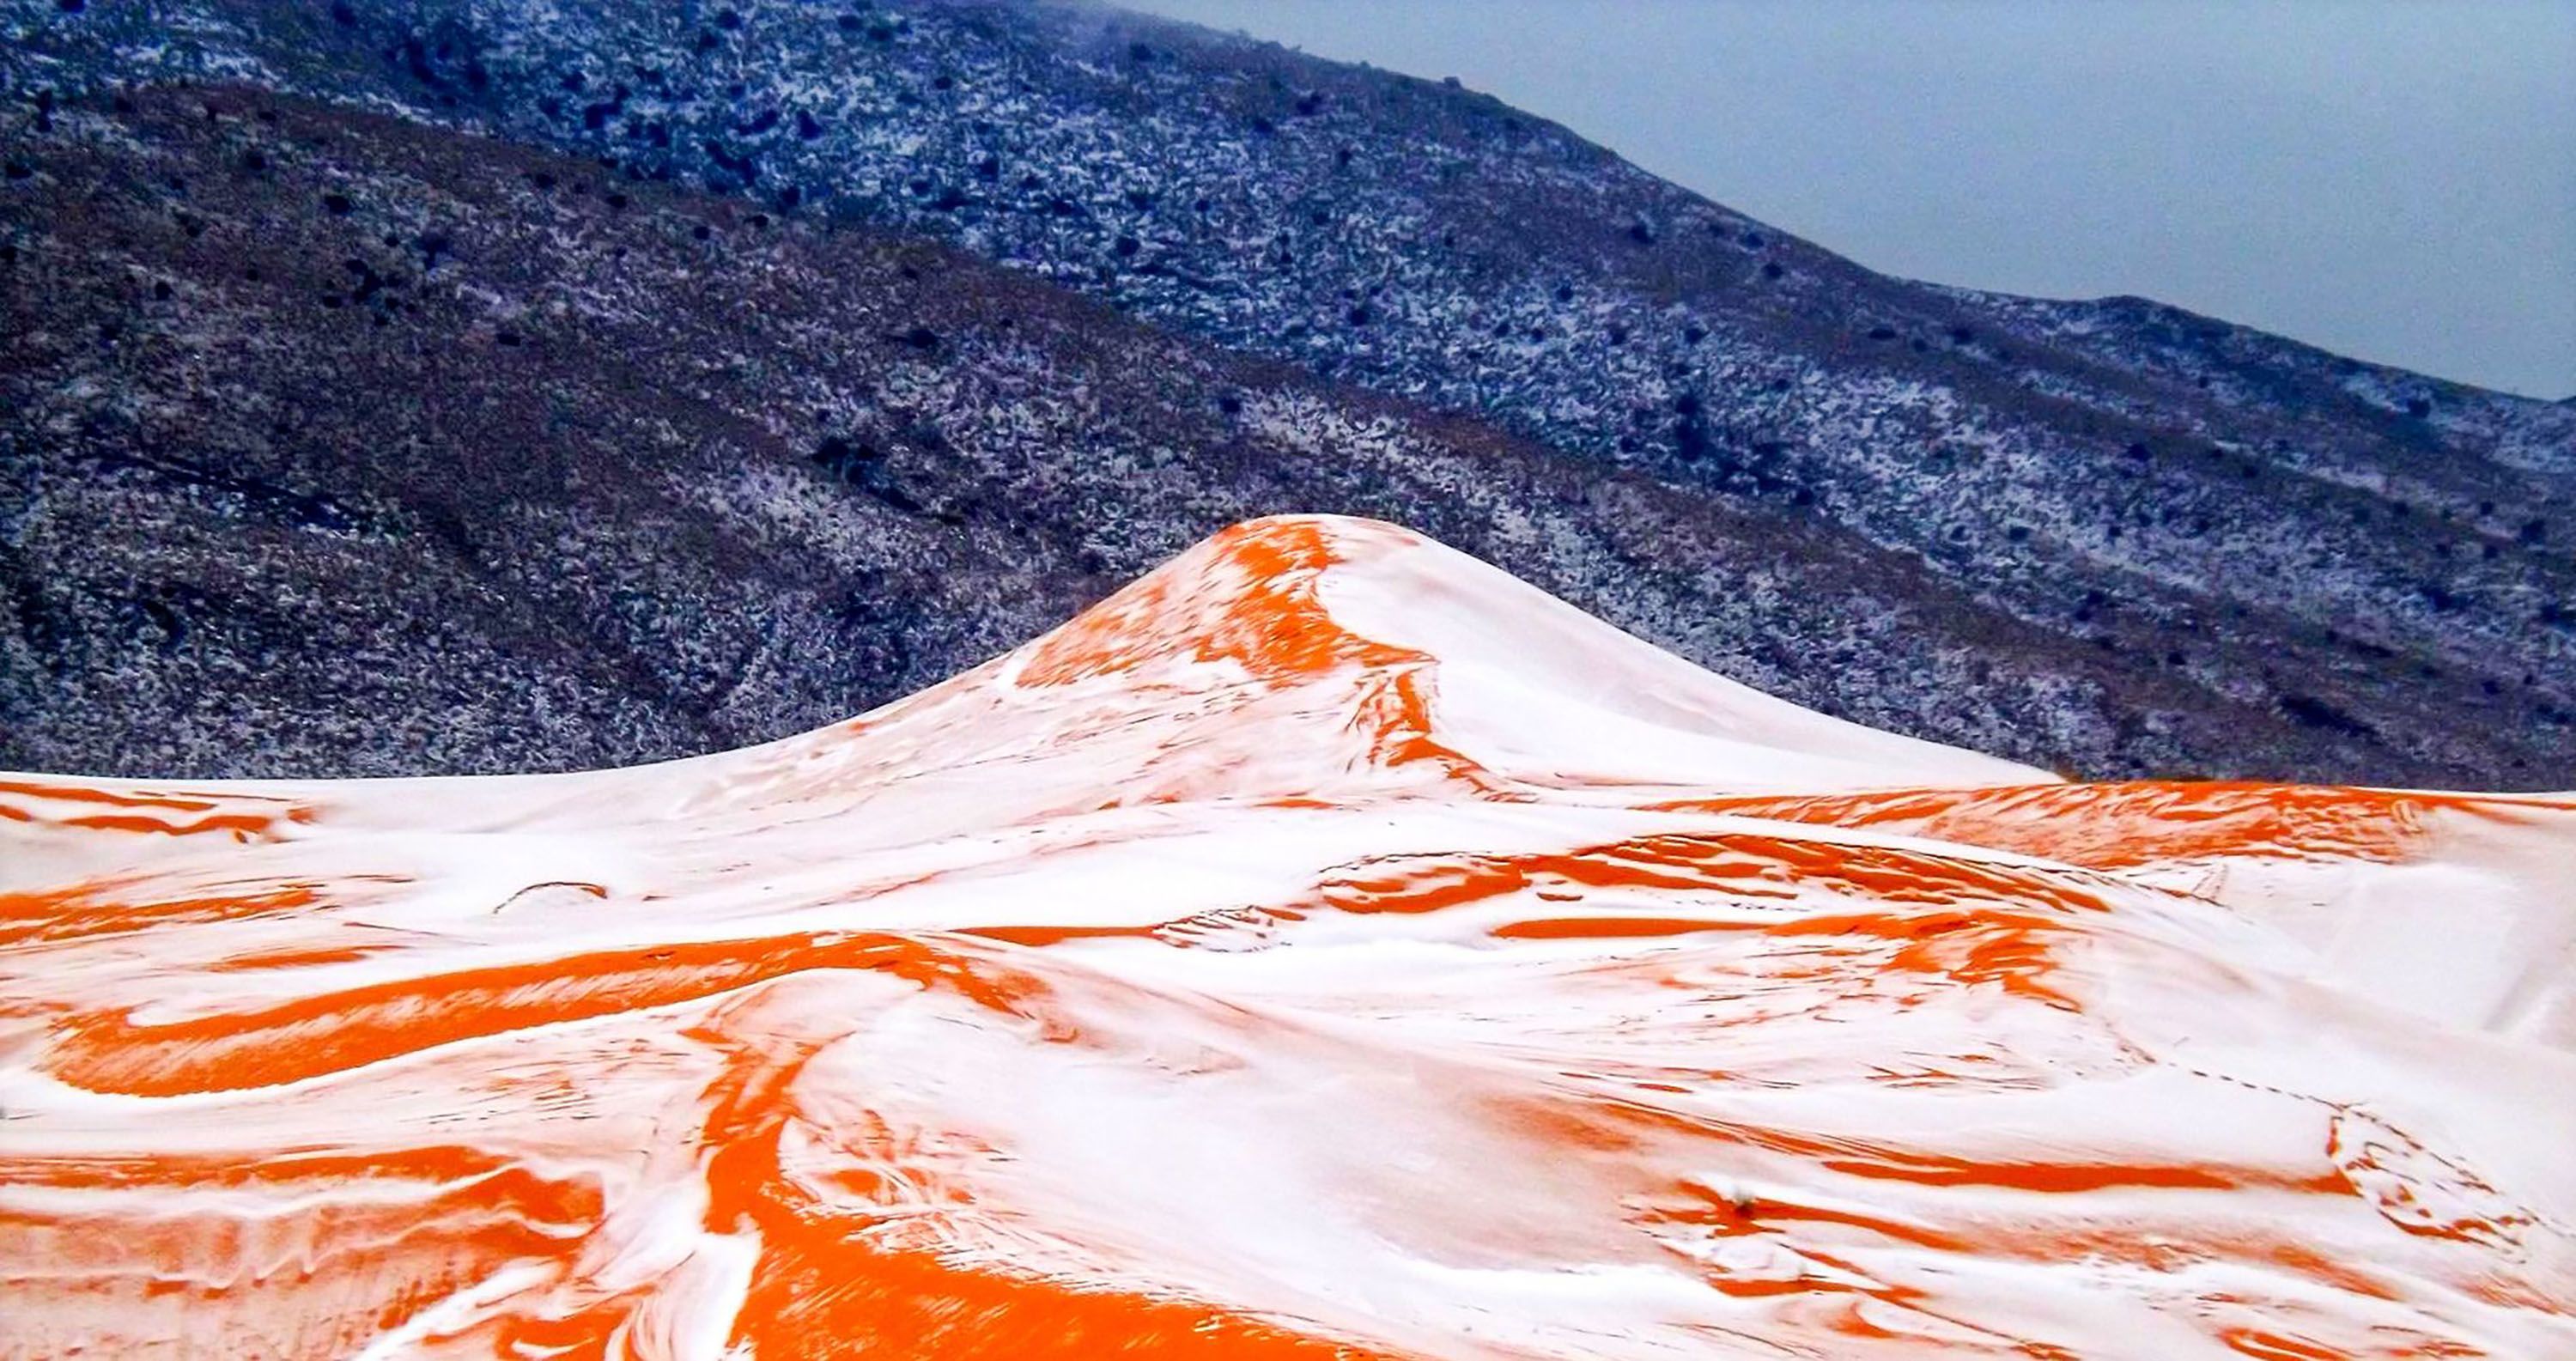 Snow falls in Sahara for first time in 37 years | CNN